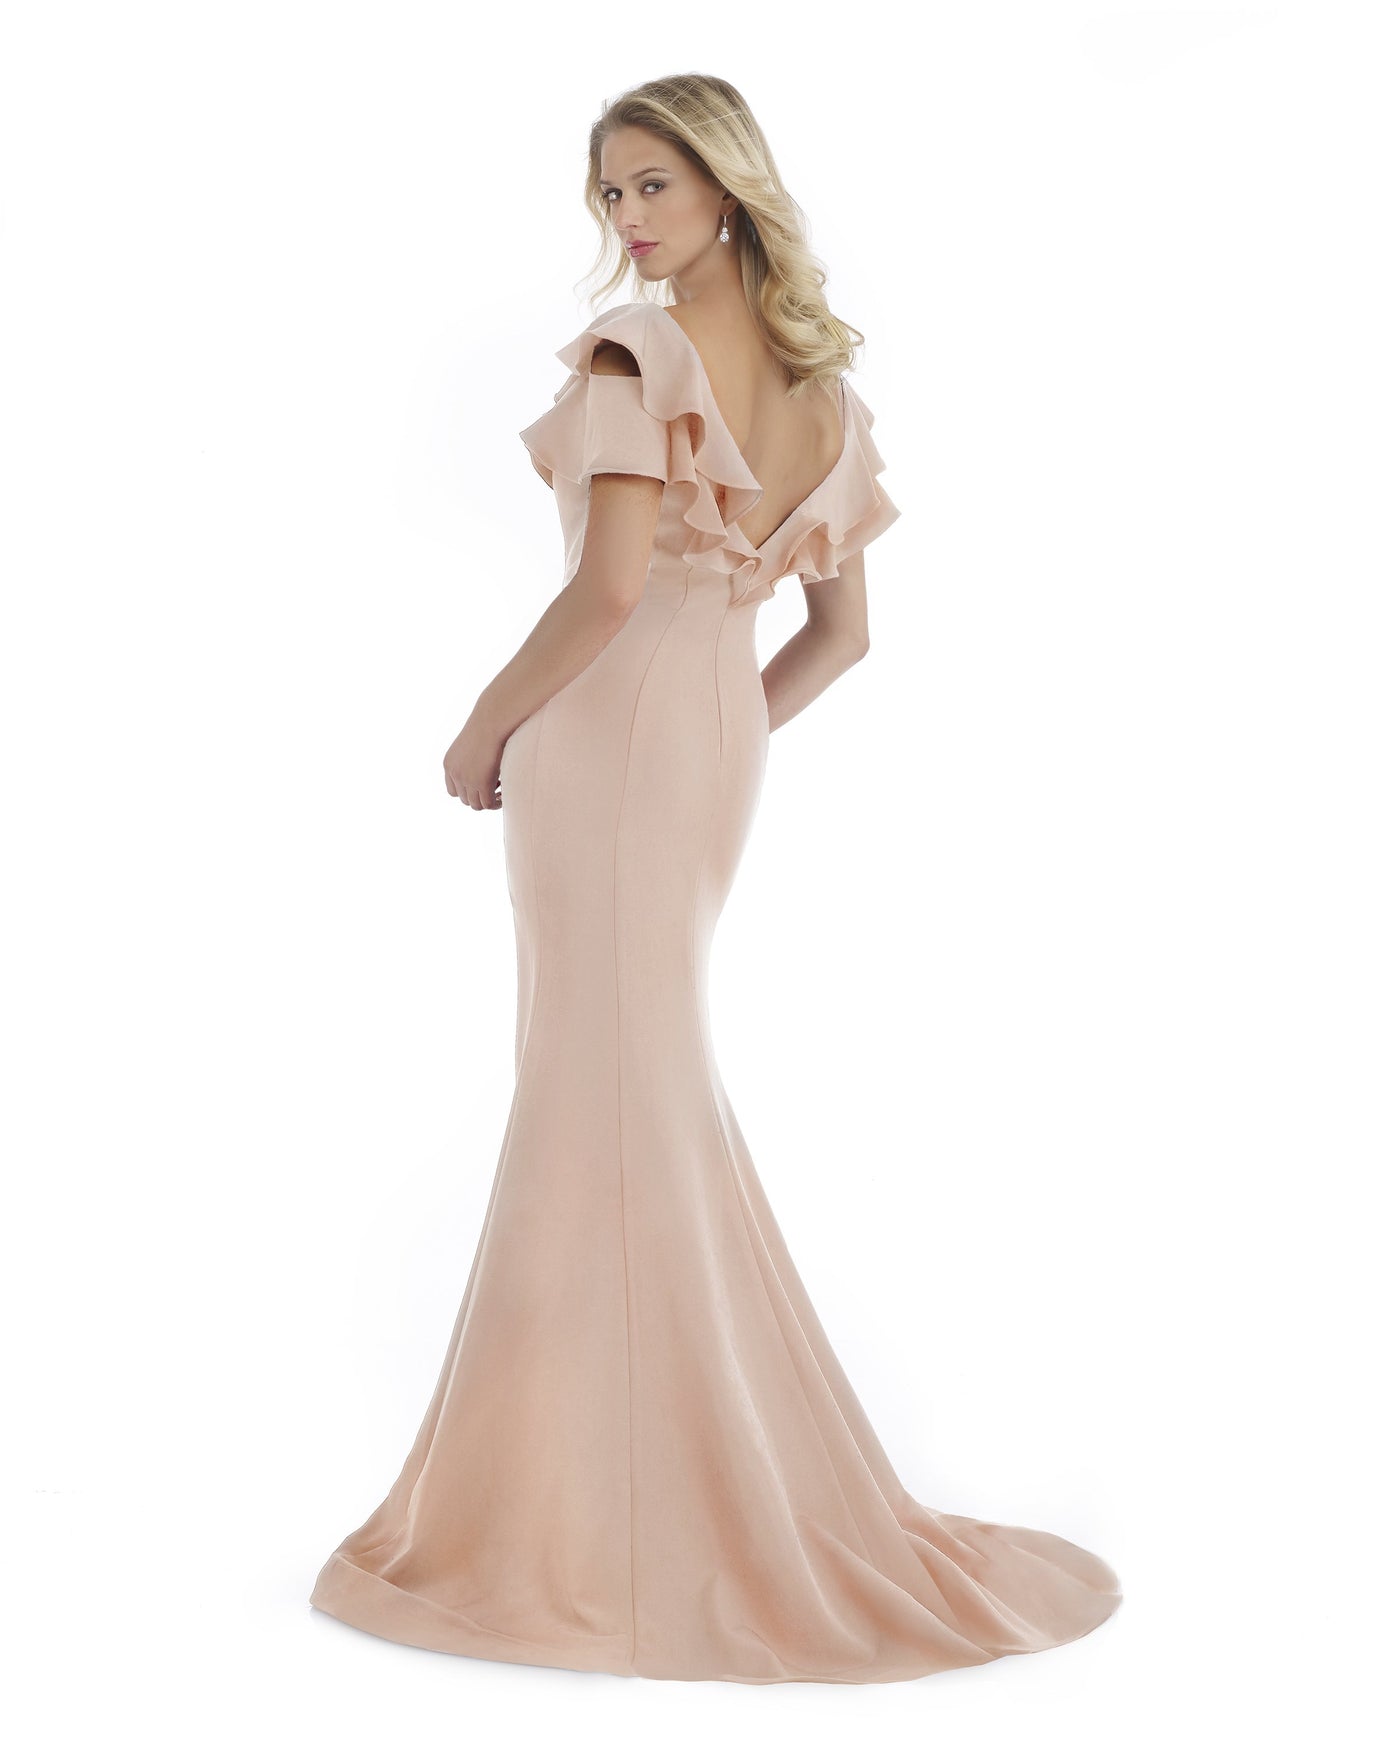 Morrell Maxie - 16064 Ruffled Plunging V-neck Mermaid Dress in Pink